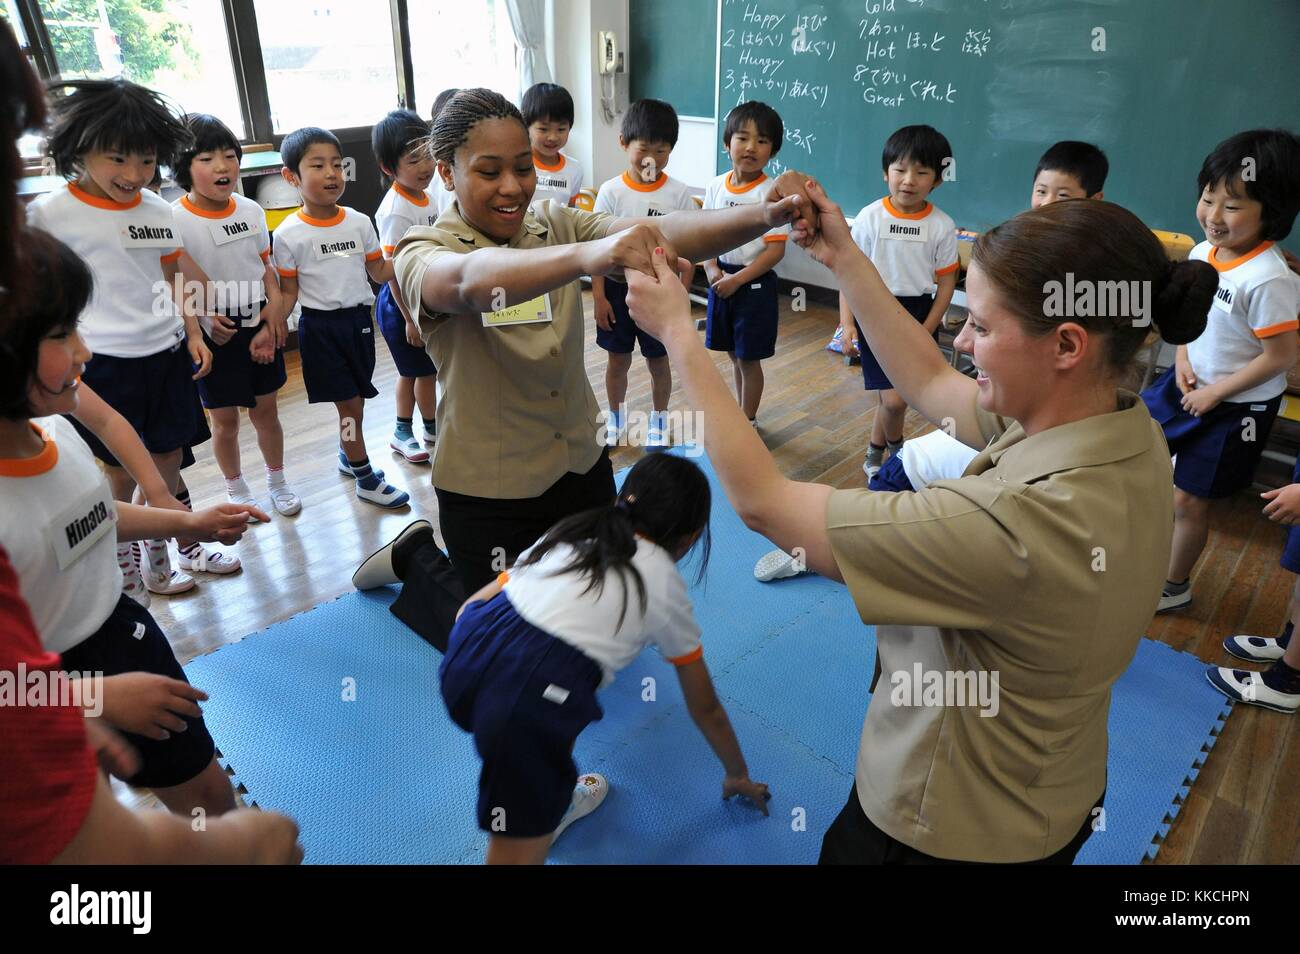 Hull Maintenance Technician 3rd Class Jane Clark and Boatswain's Mate Seaman Brittany Chiles, assigned to the Arleigh Burke-class guided-missile destroyer USS McCampbell DDG 85, play a game with Ogamo Elementary School first graders, Shimoda, Japan. Image courtesy Mass Communication Specialist Seaman Declan Barnes/US Navy. 2012. Stock Photo